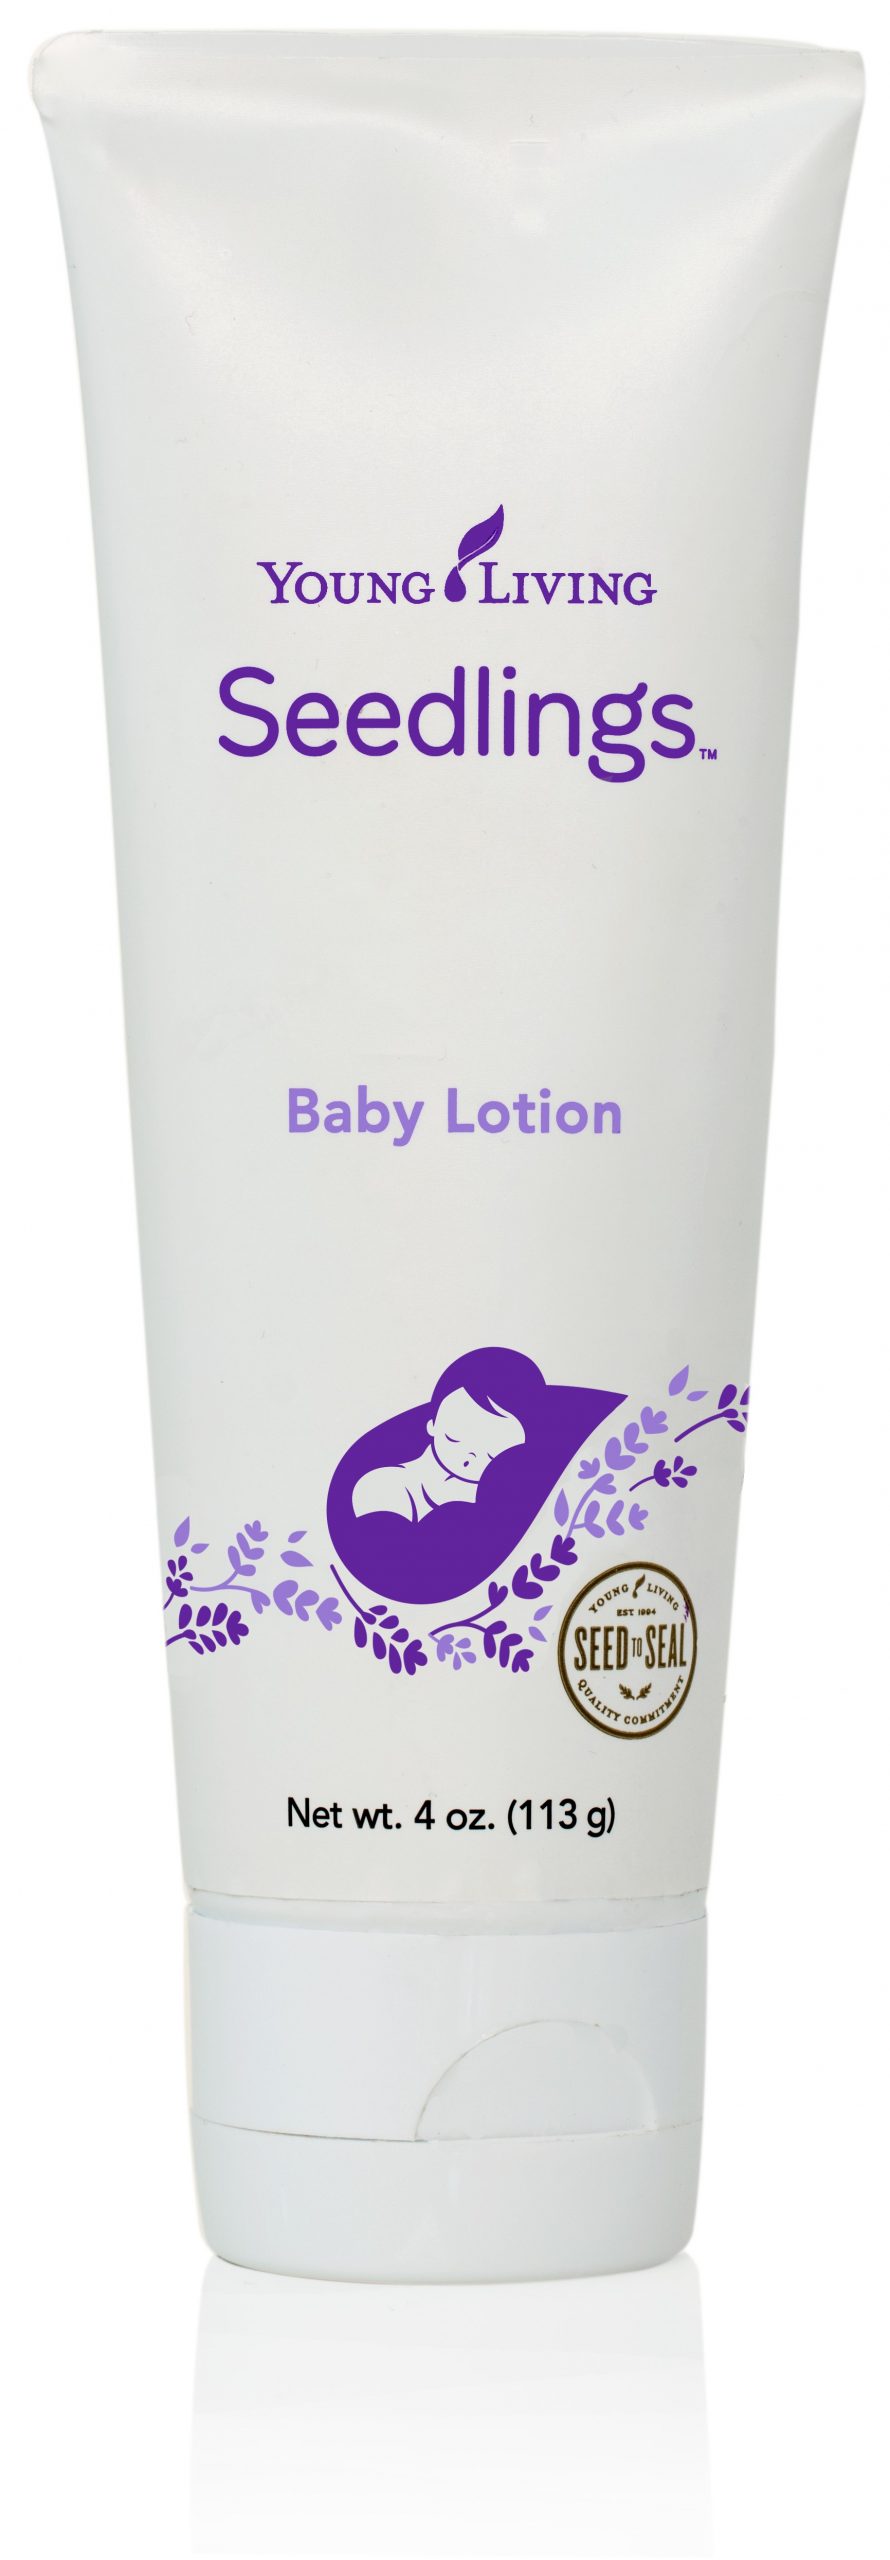 Seedlings Baby Lotion - Young Living Essential Oils